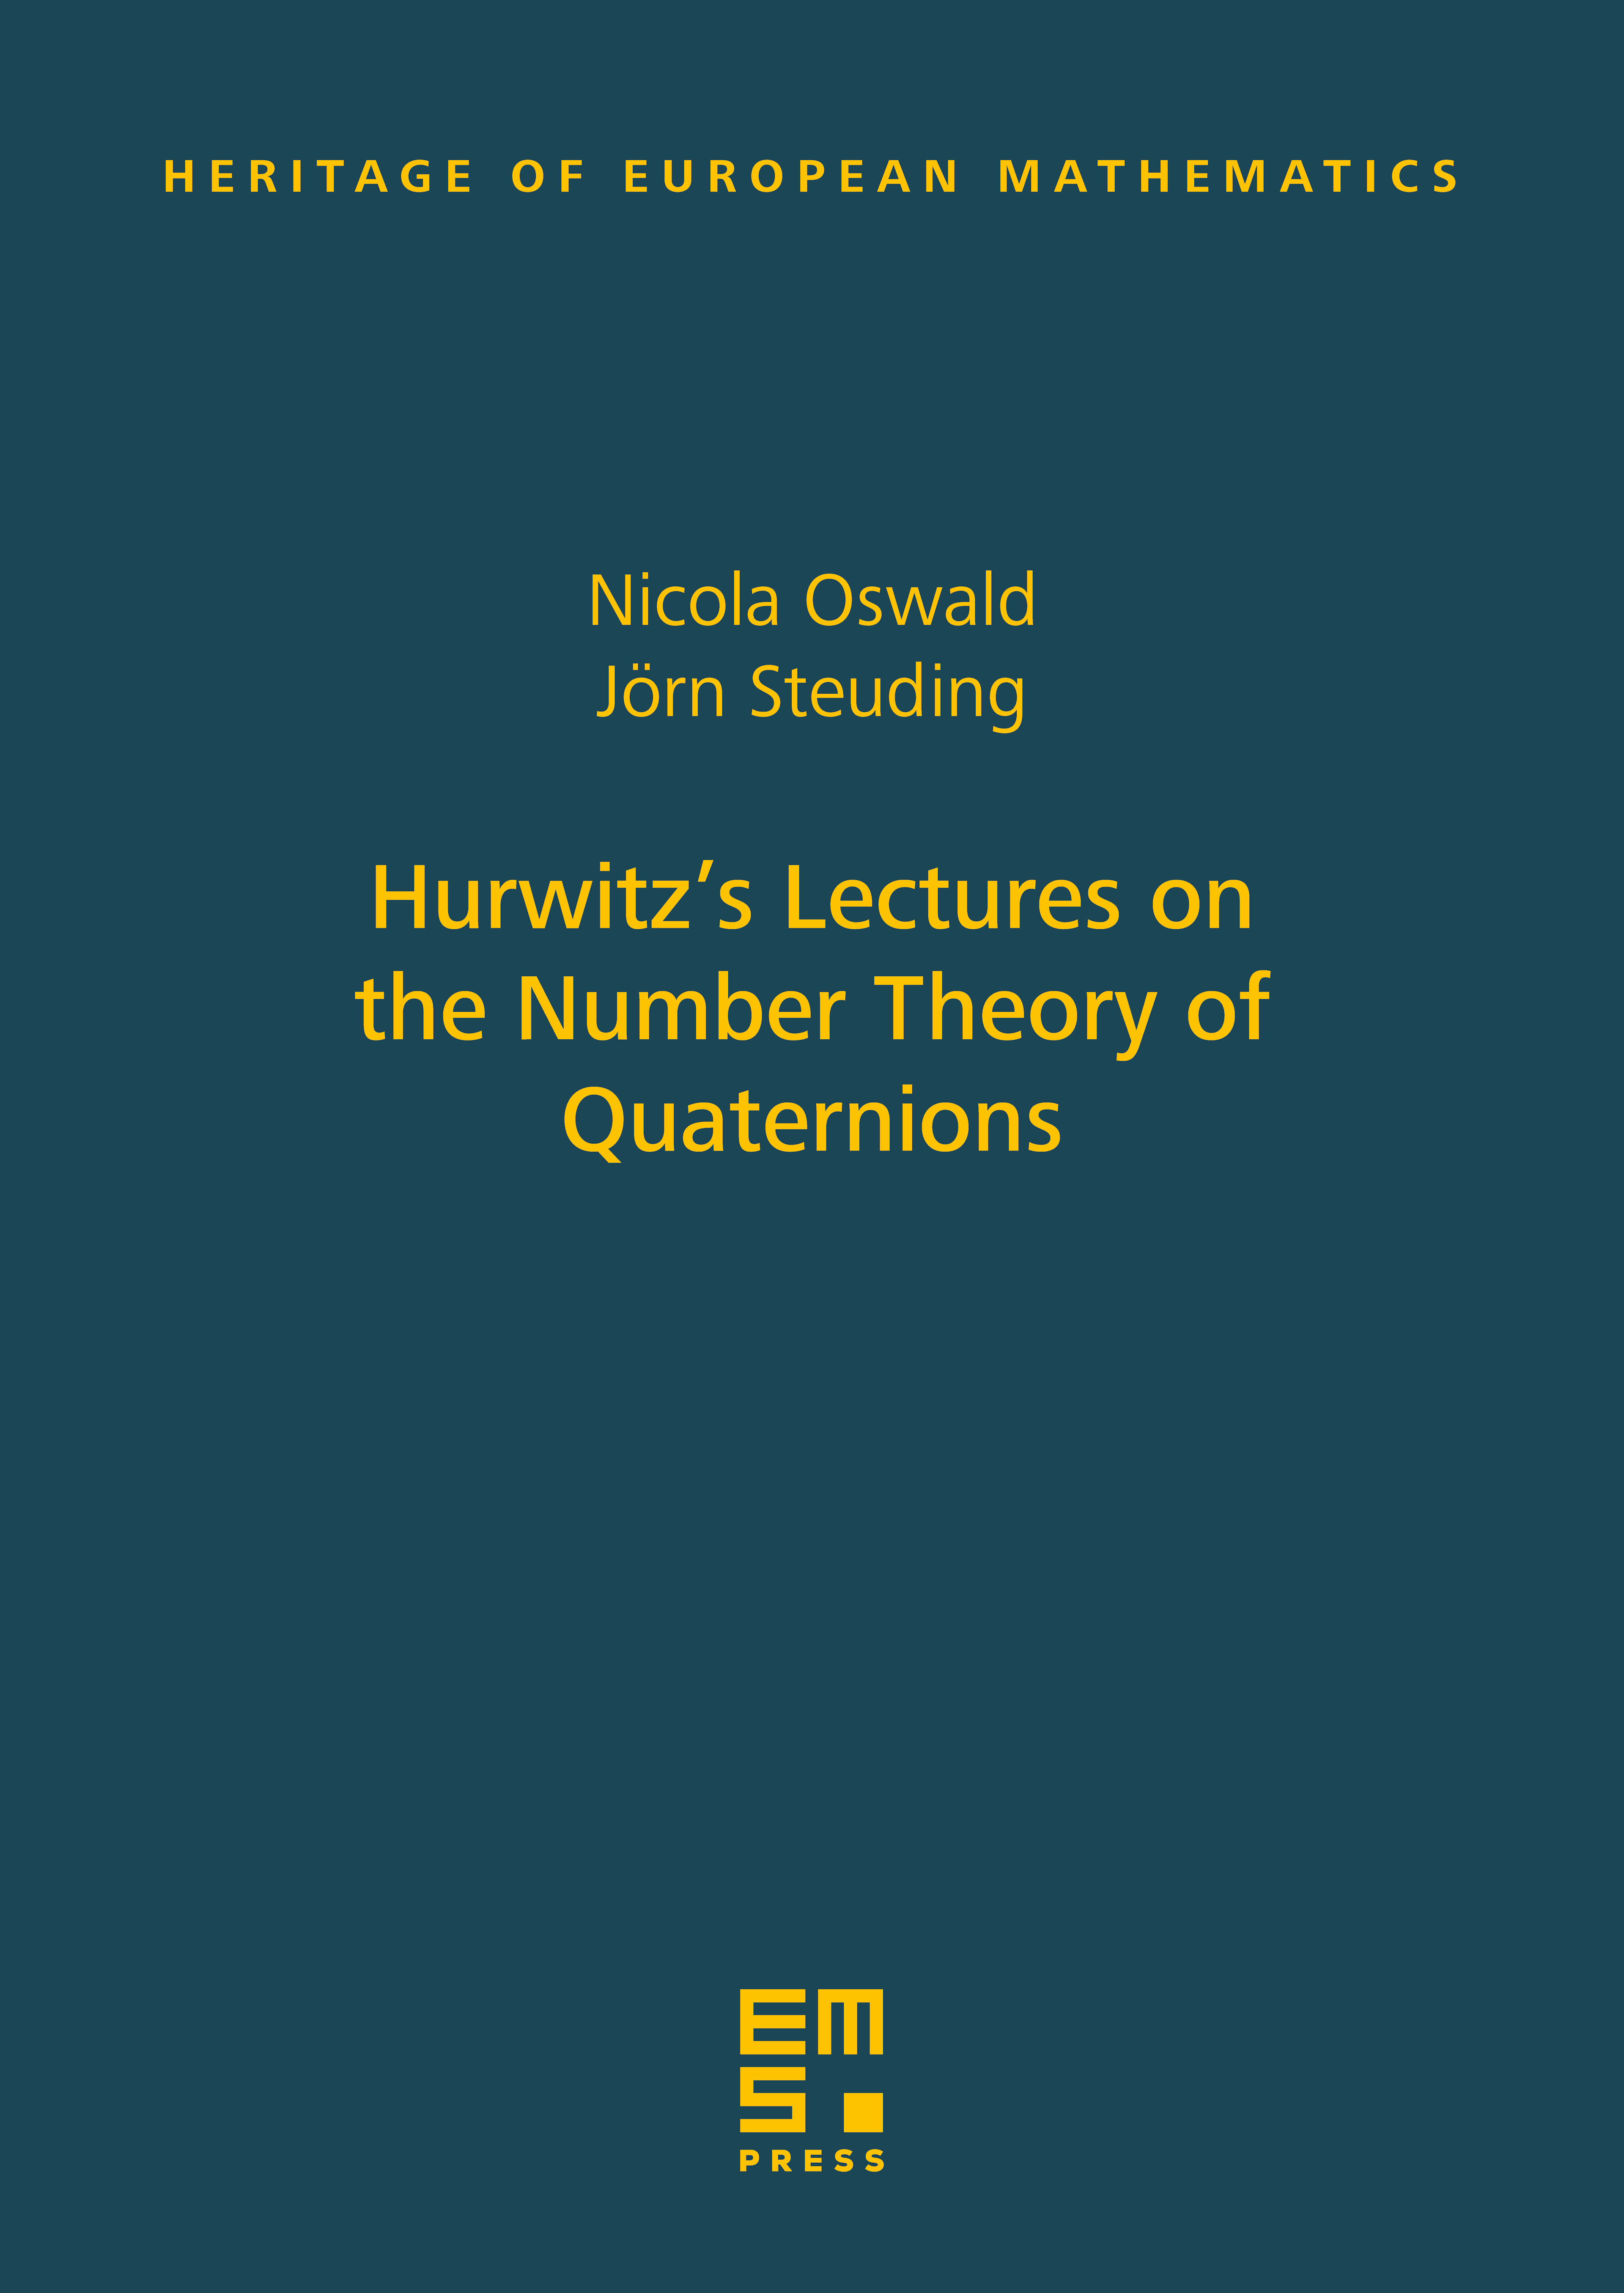 Hurwitz’s Lectures on the Number Theory of Quaternions cover